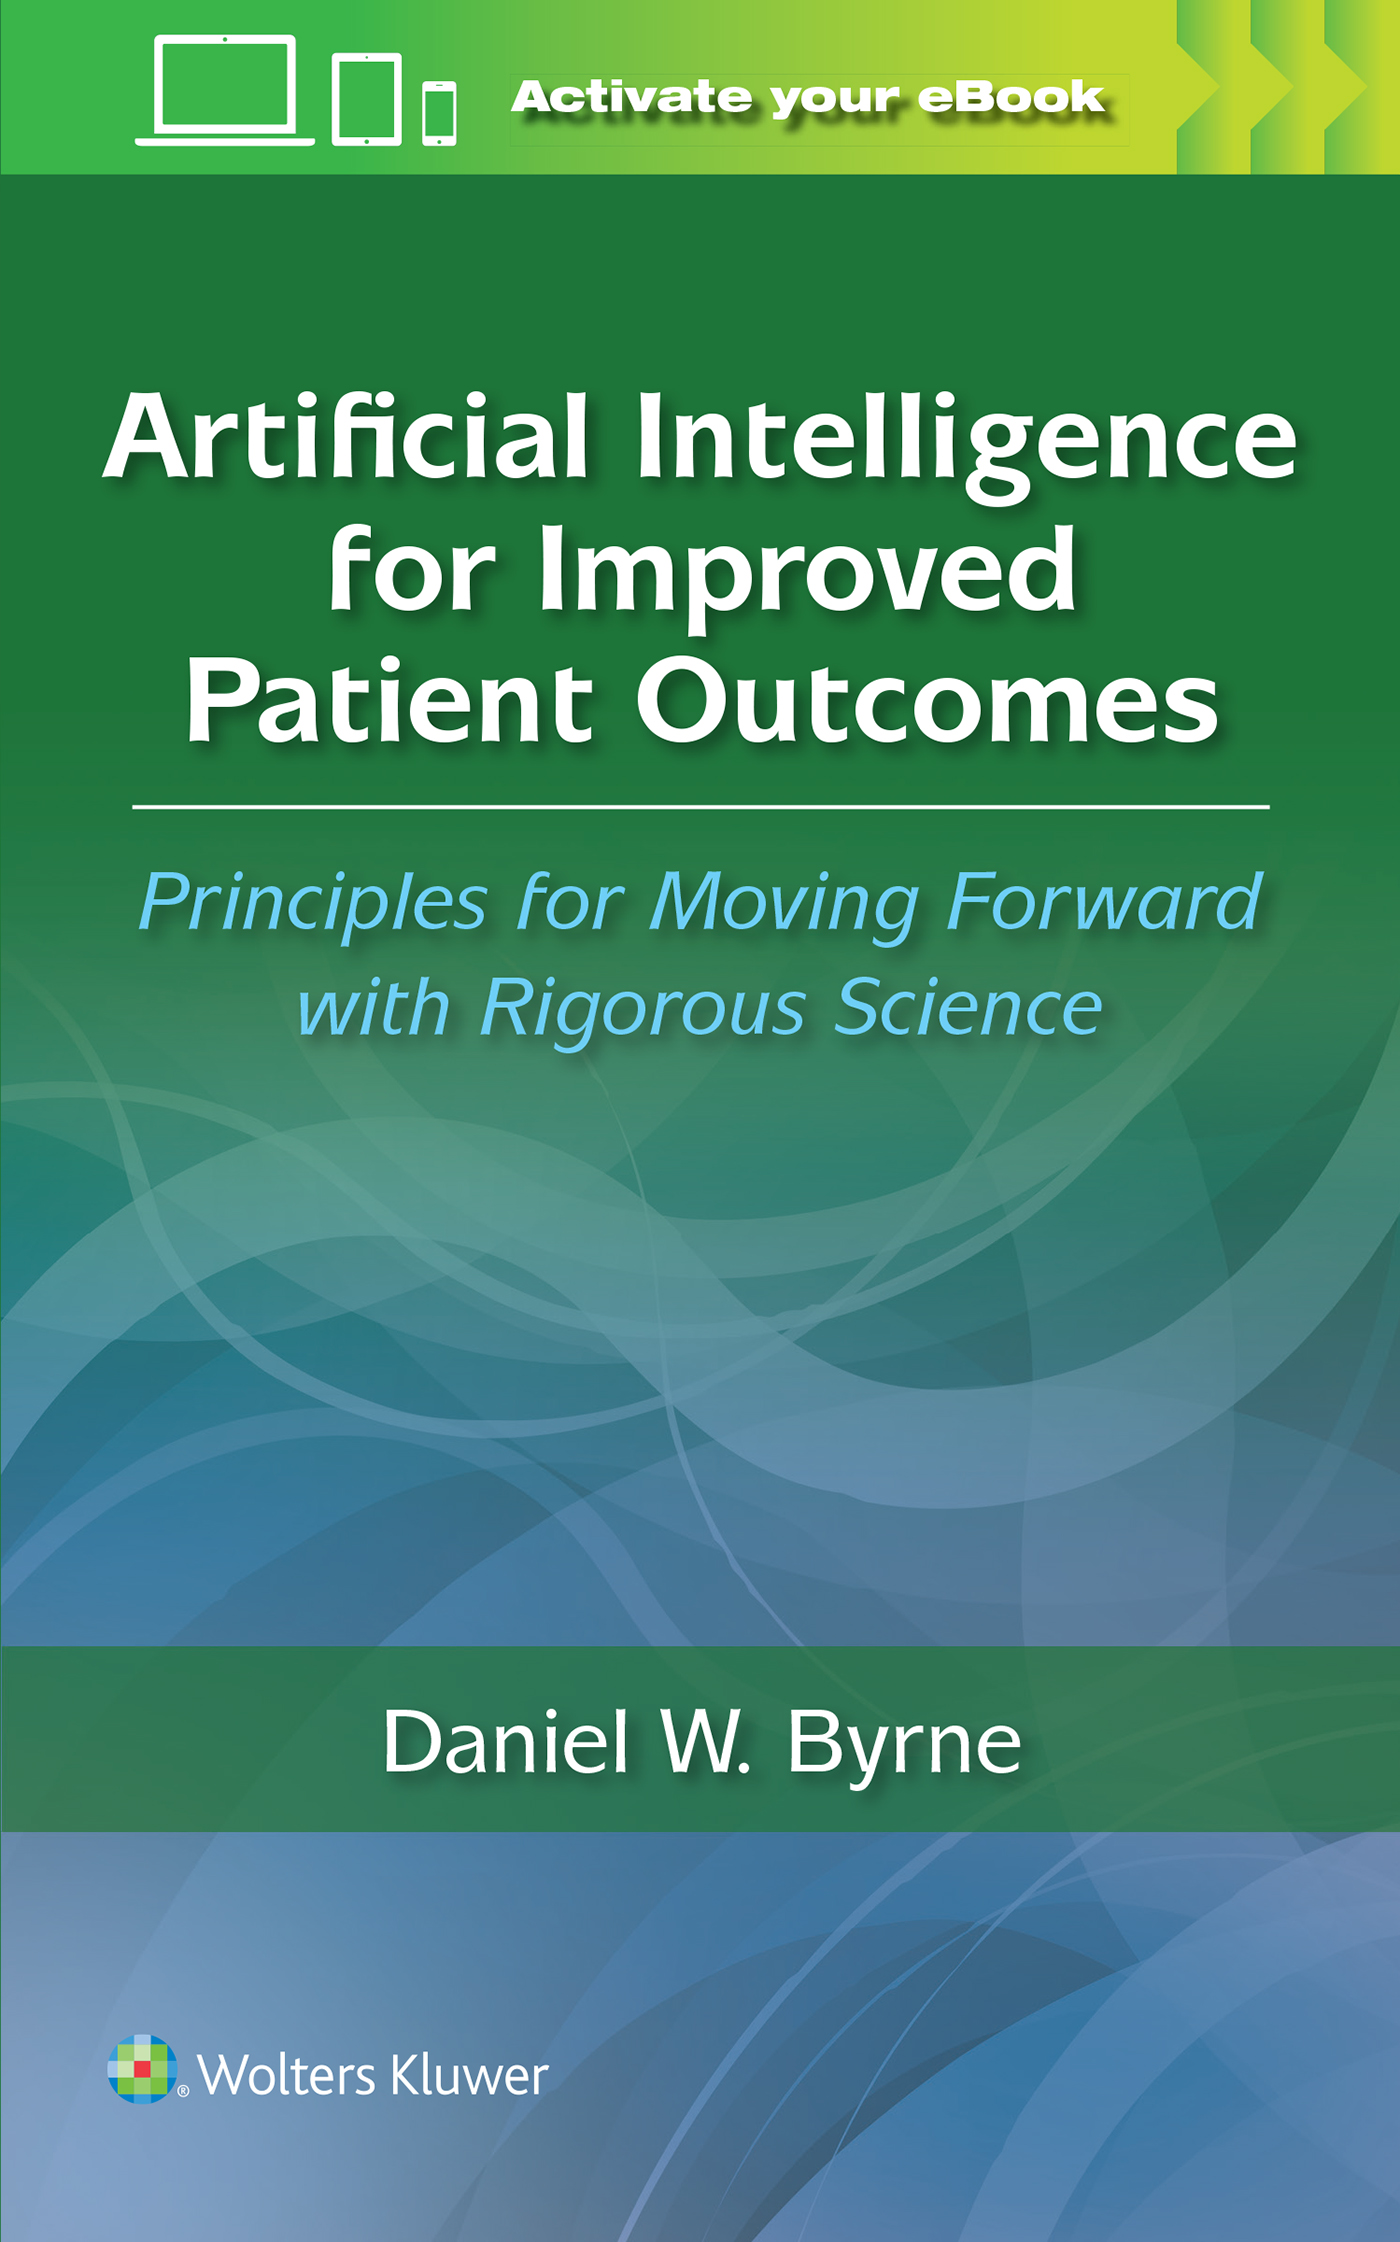 Daniel - Artificial Intelligence for Improved Patient Outcomes